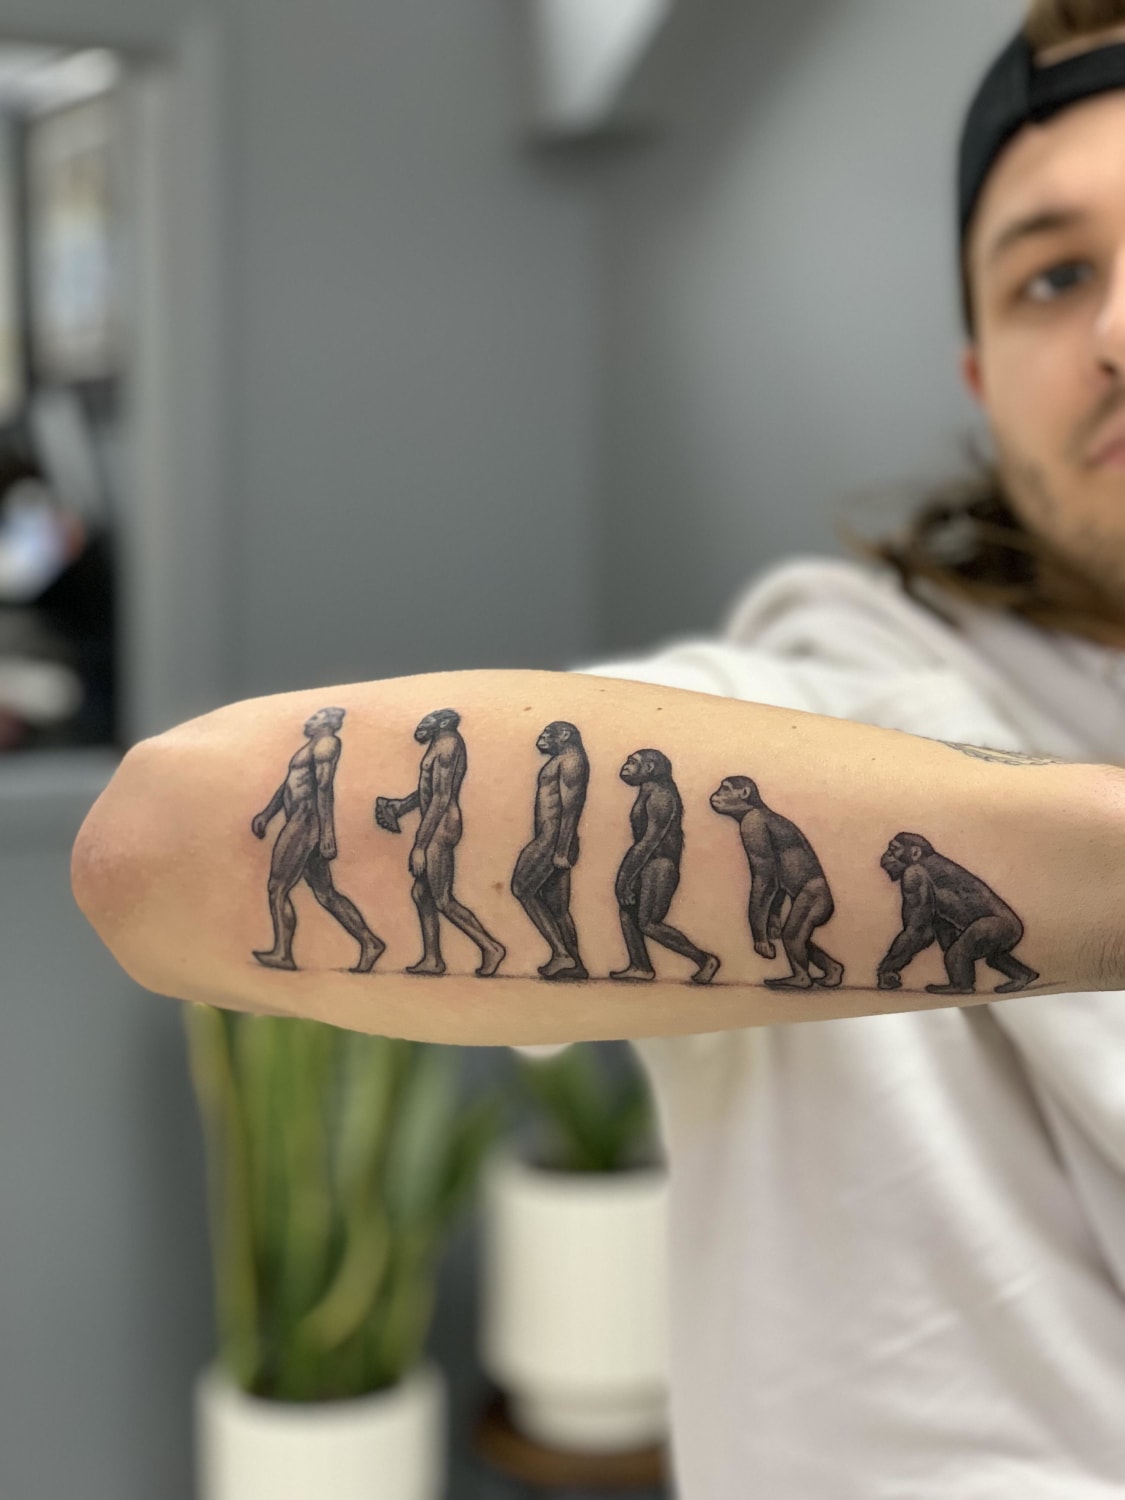 Theory of evolution done by Logan Bourbina at studio 13 in Fort Wayne IN.